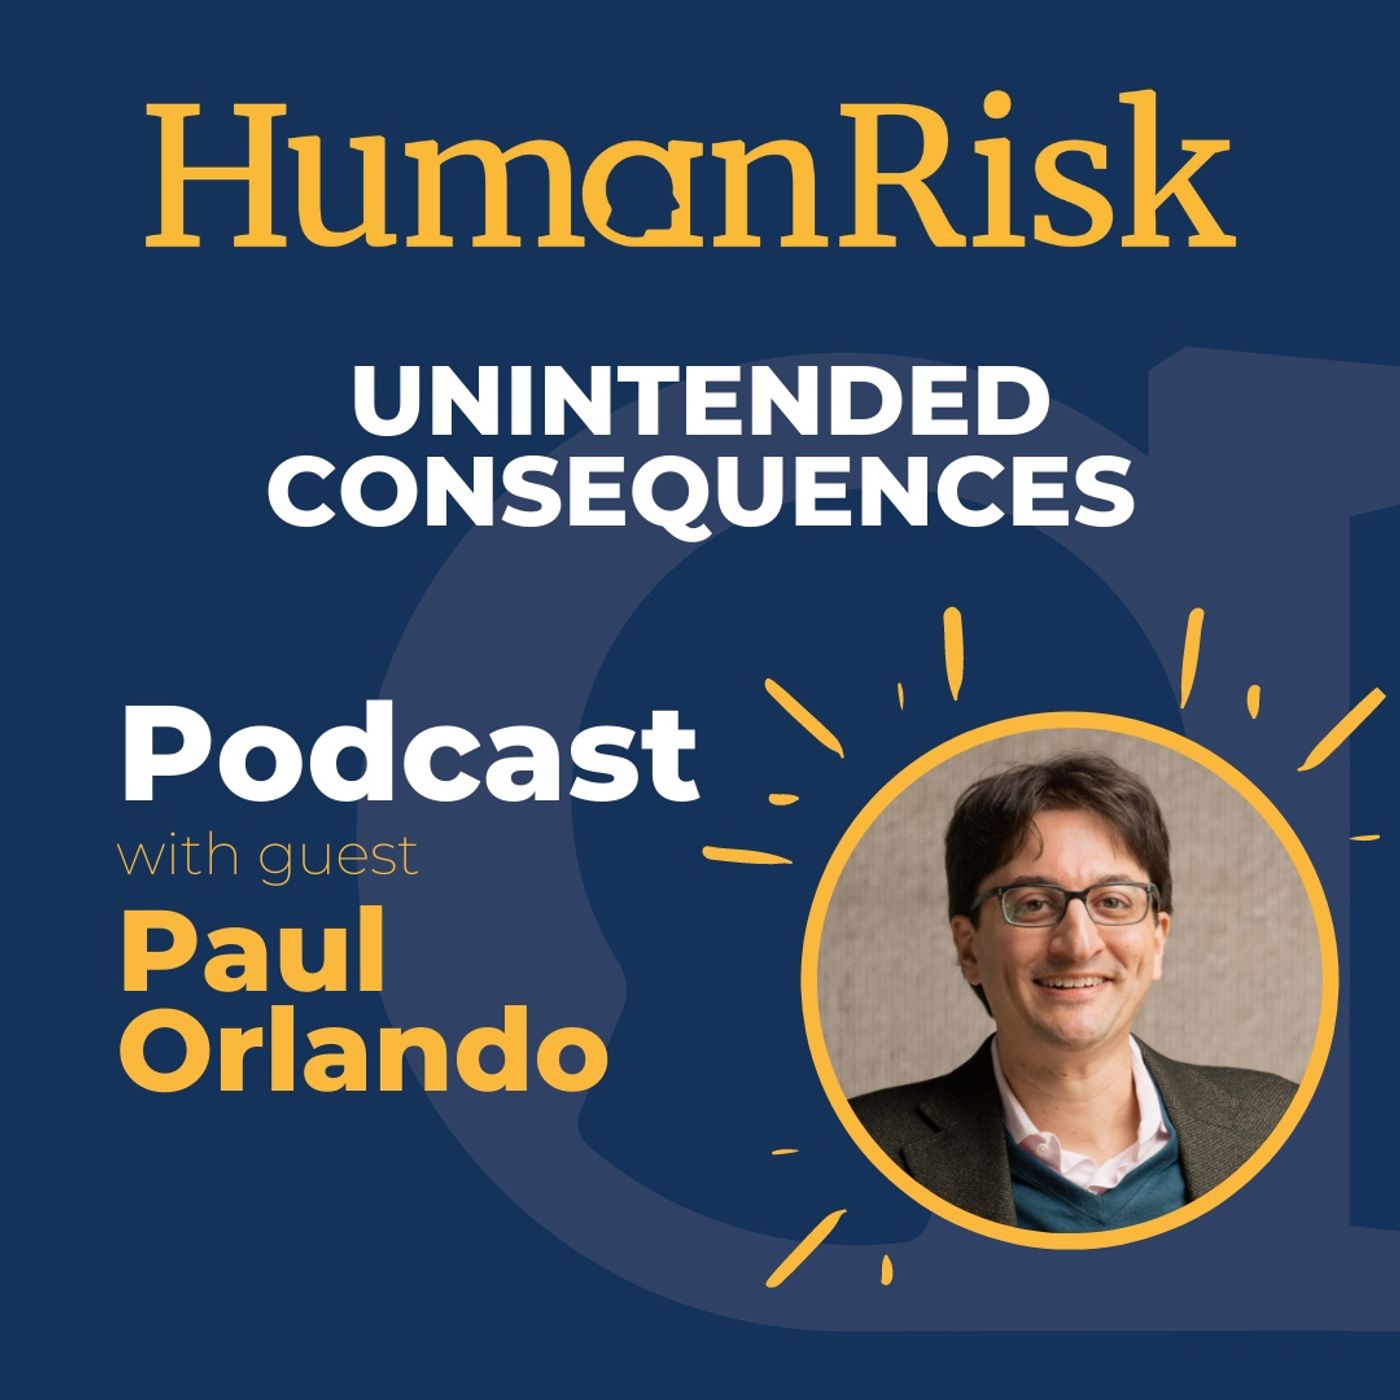 Paul Orlando on Unintended Consequences or why we sometimes don't think things through